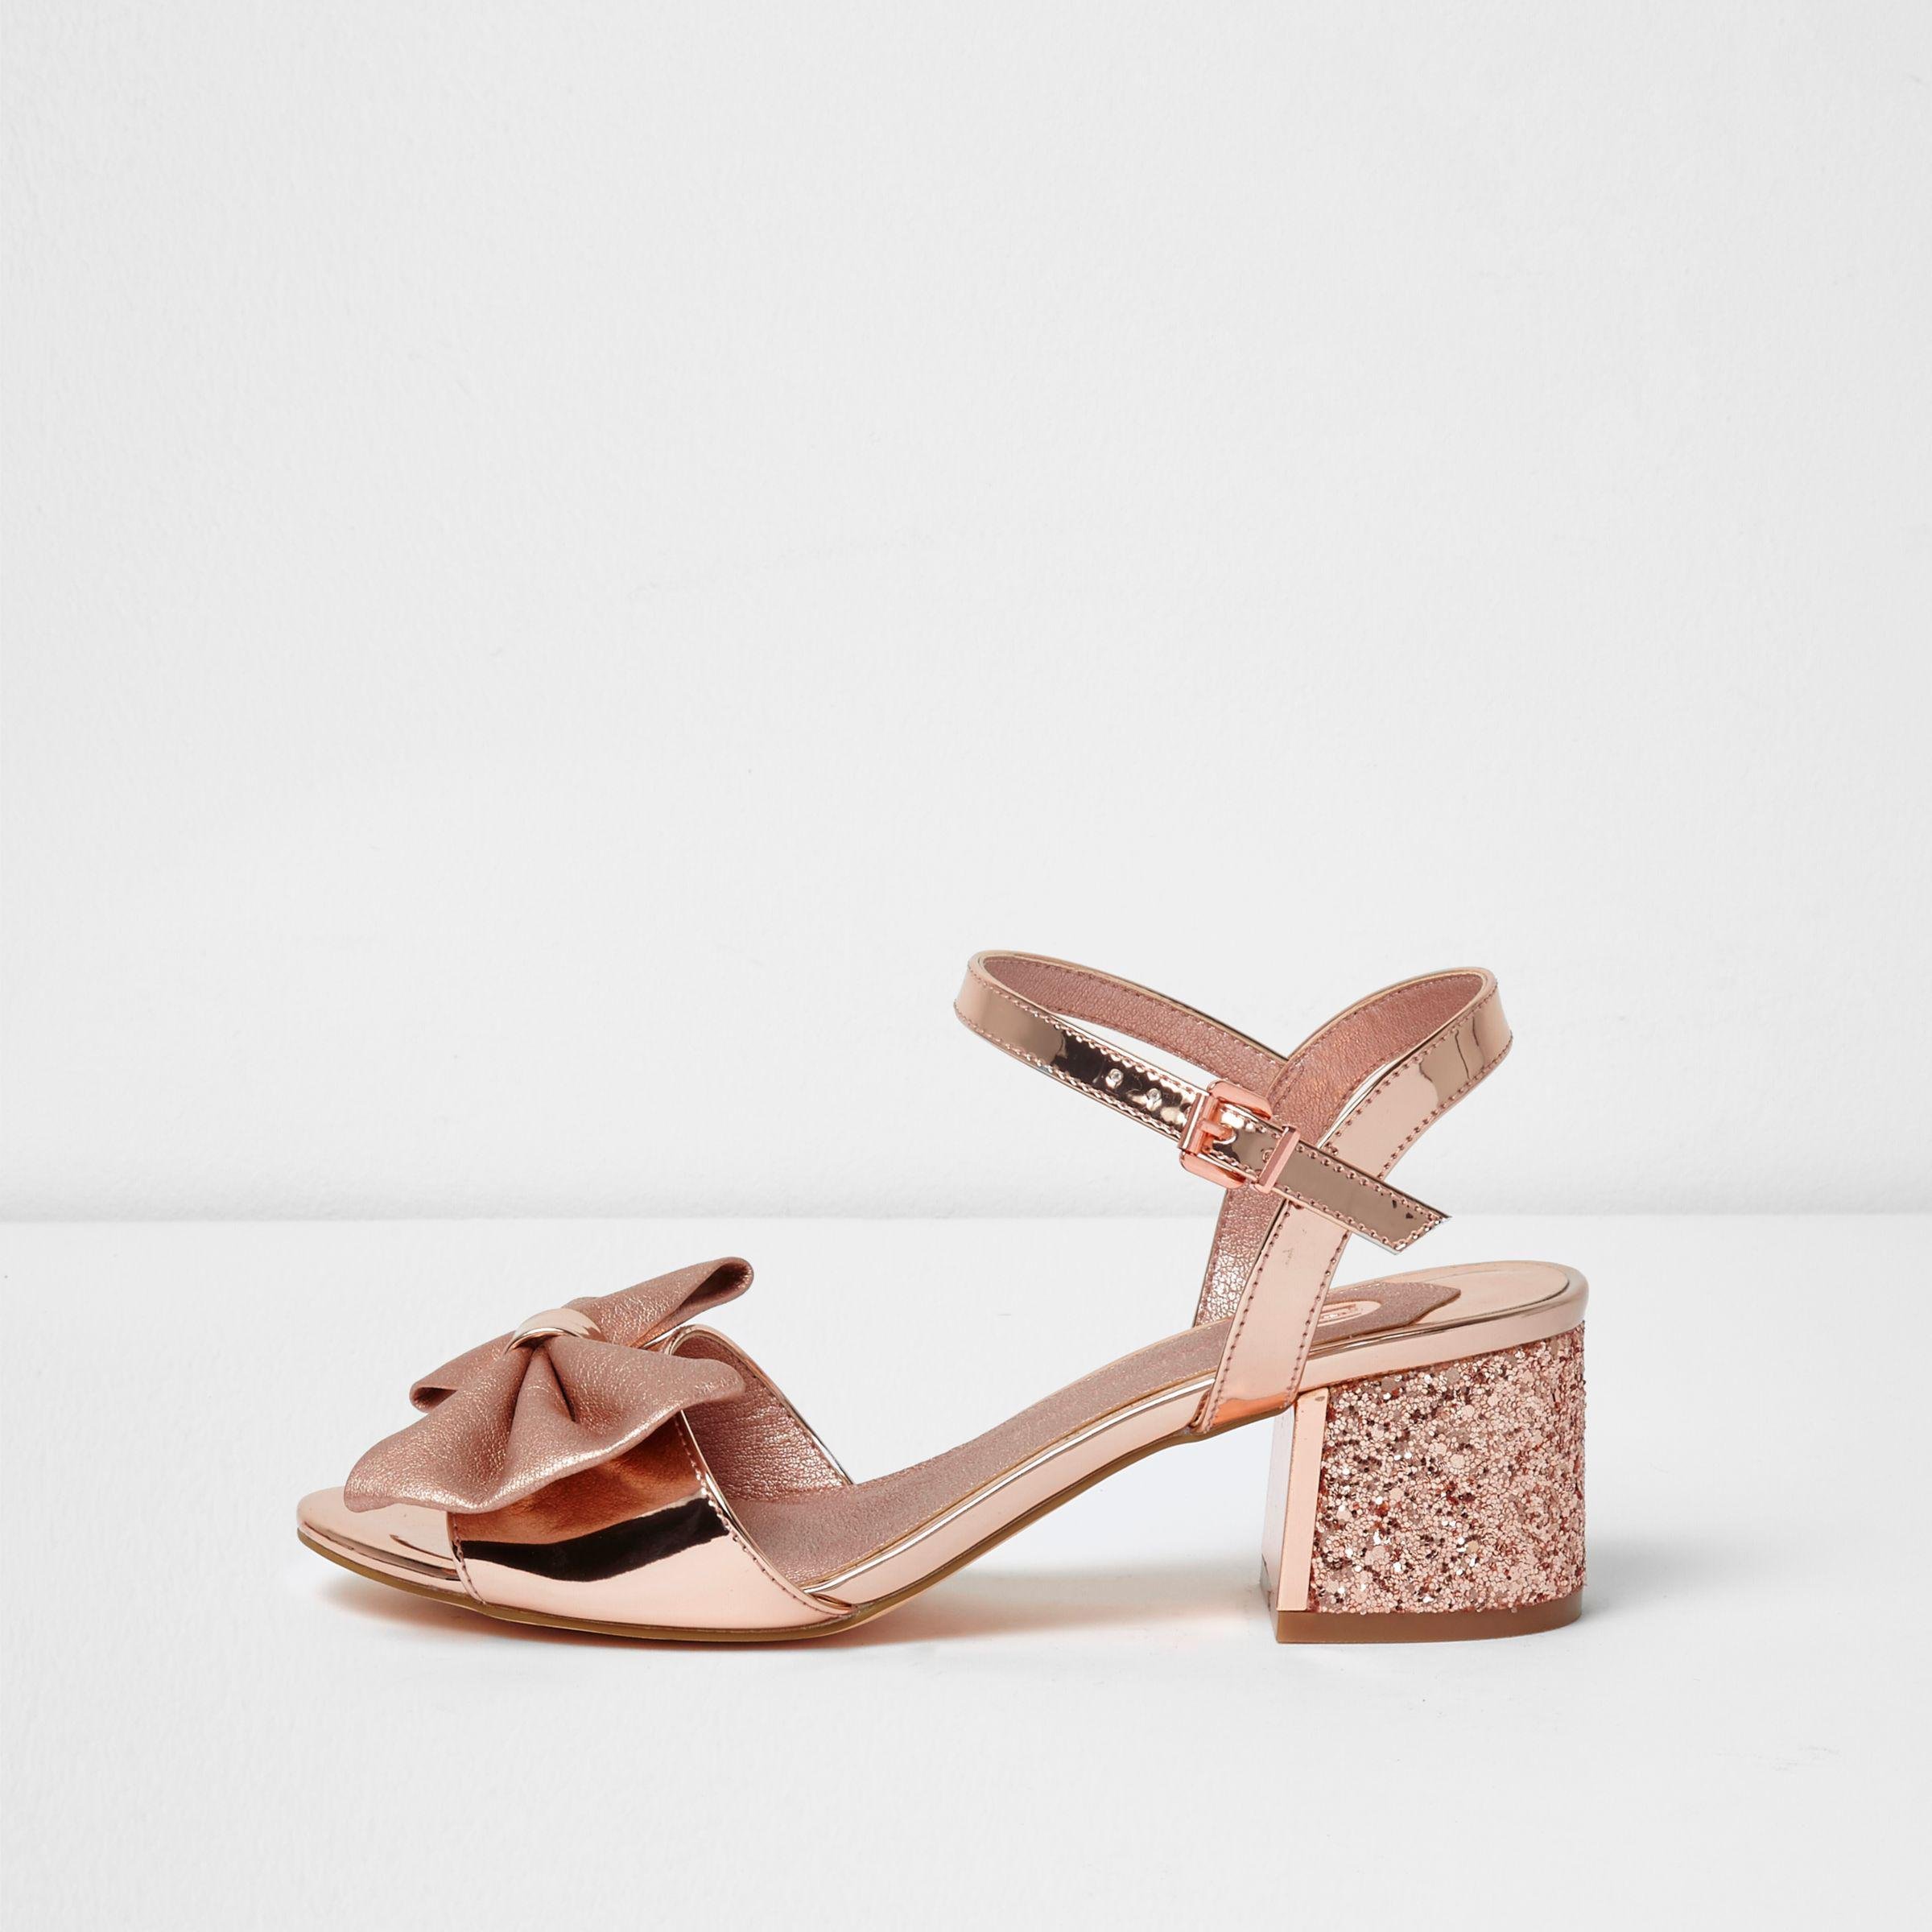 Discover more than 147 rose gold metallic sandals latest - netgroup.edu.vn